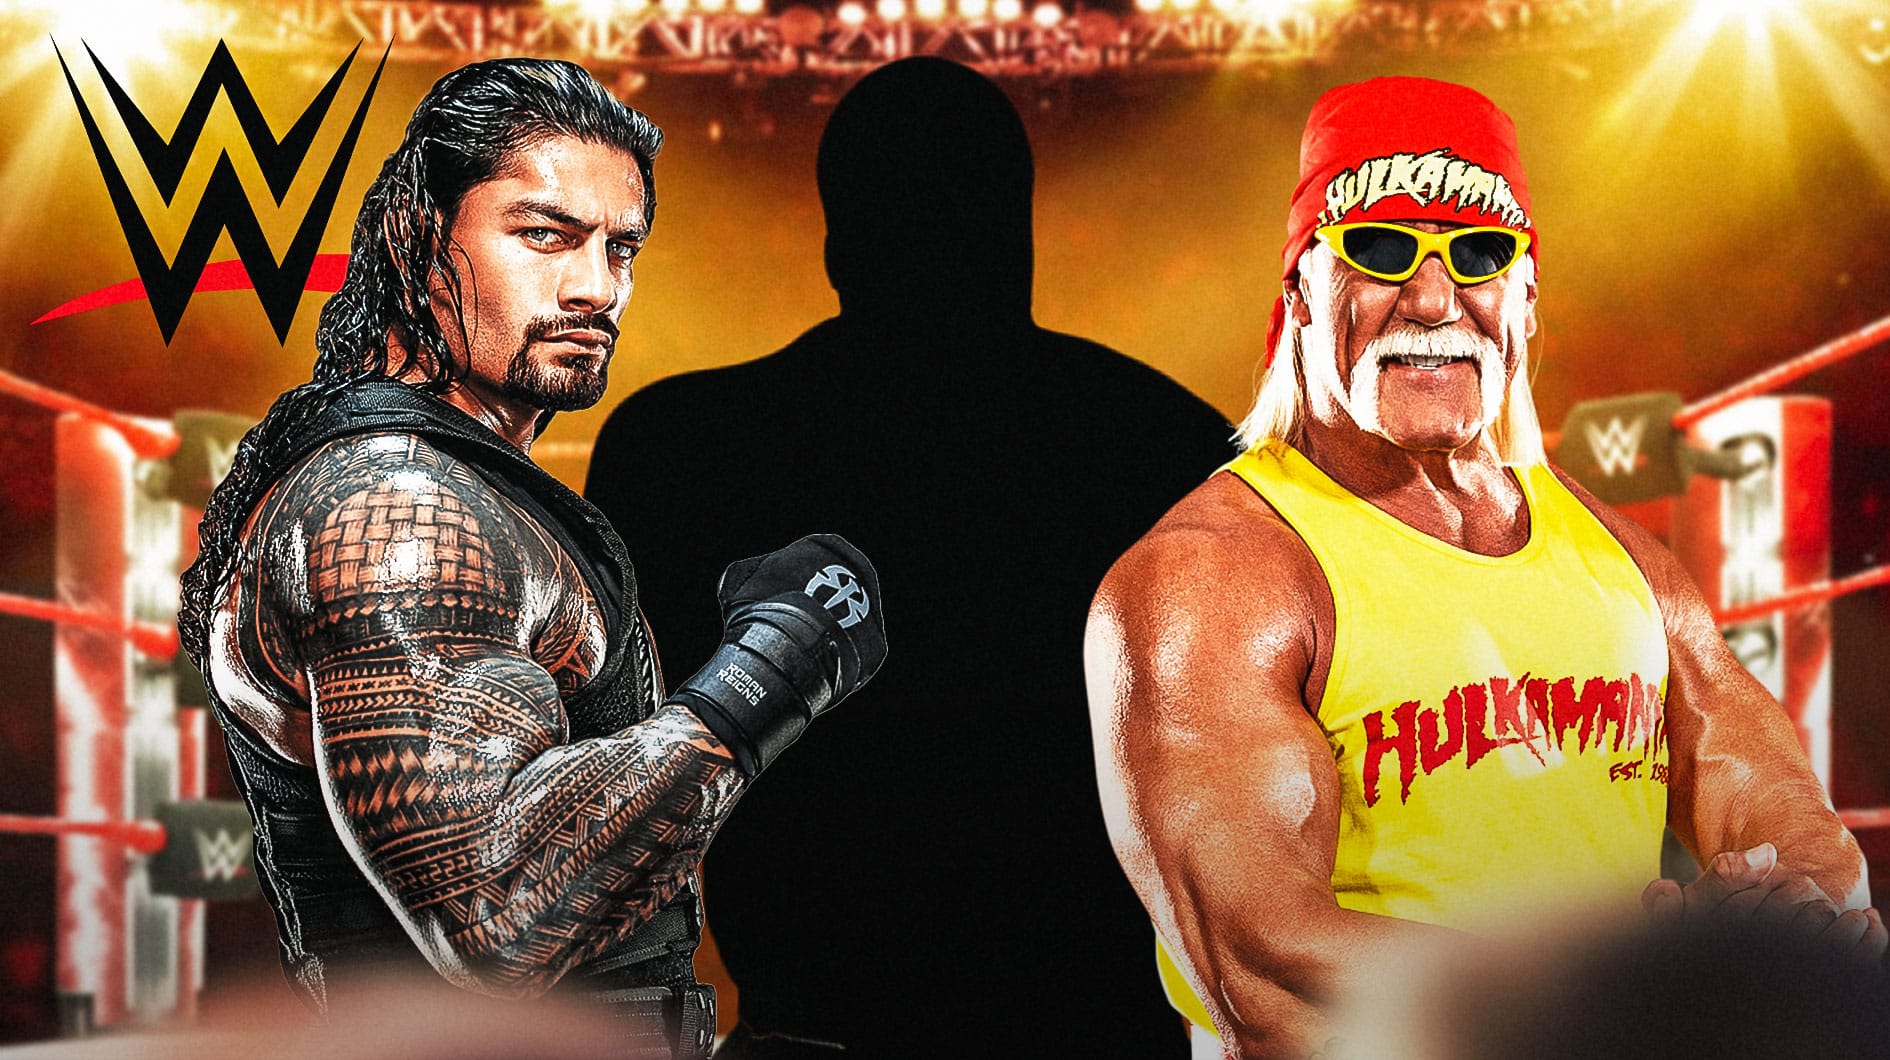 This WWE Hall of Famer compared Roman Reigns to Hulk Hogan for his multi-year dominance